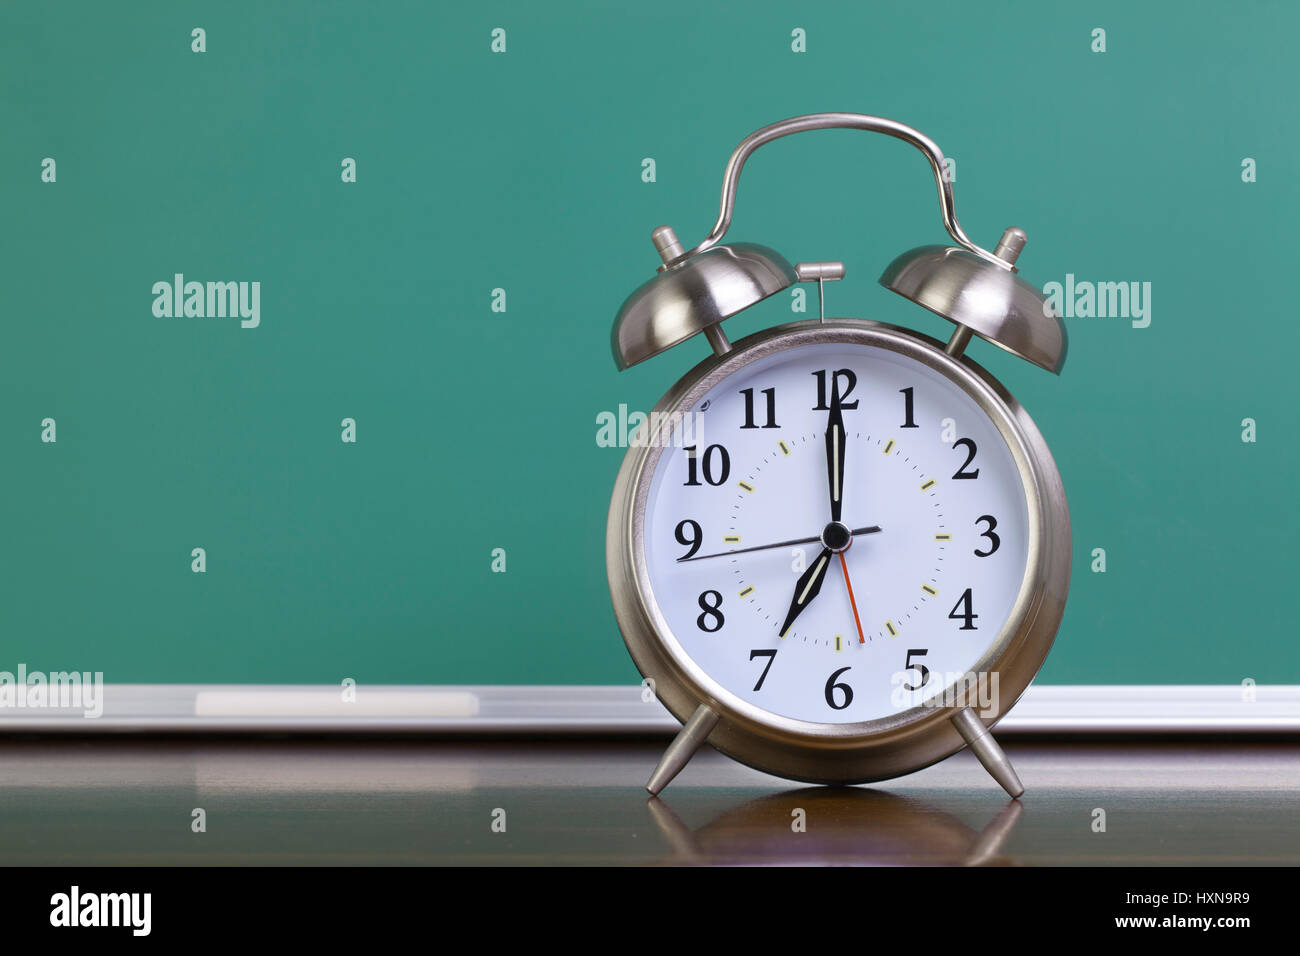 A silver alarm clock in front of a green chalkboard Stock Photo